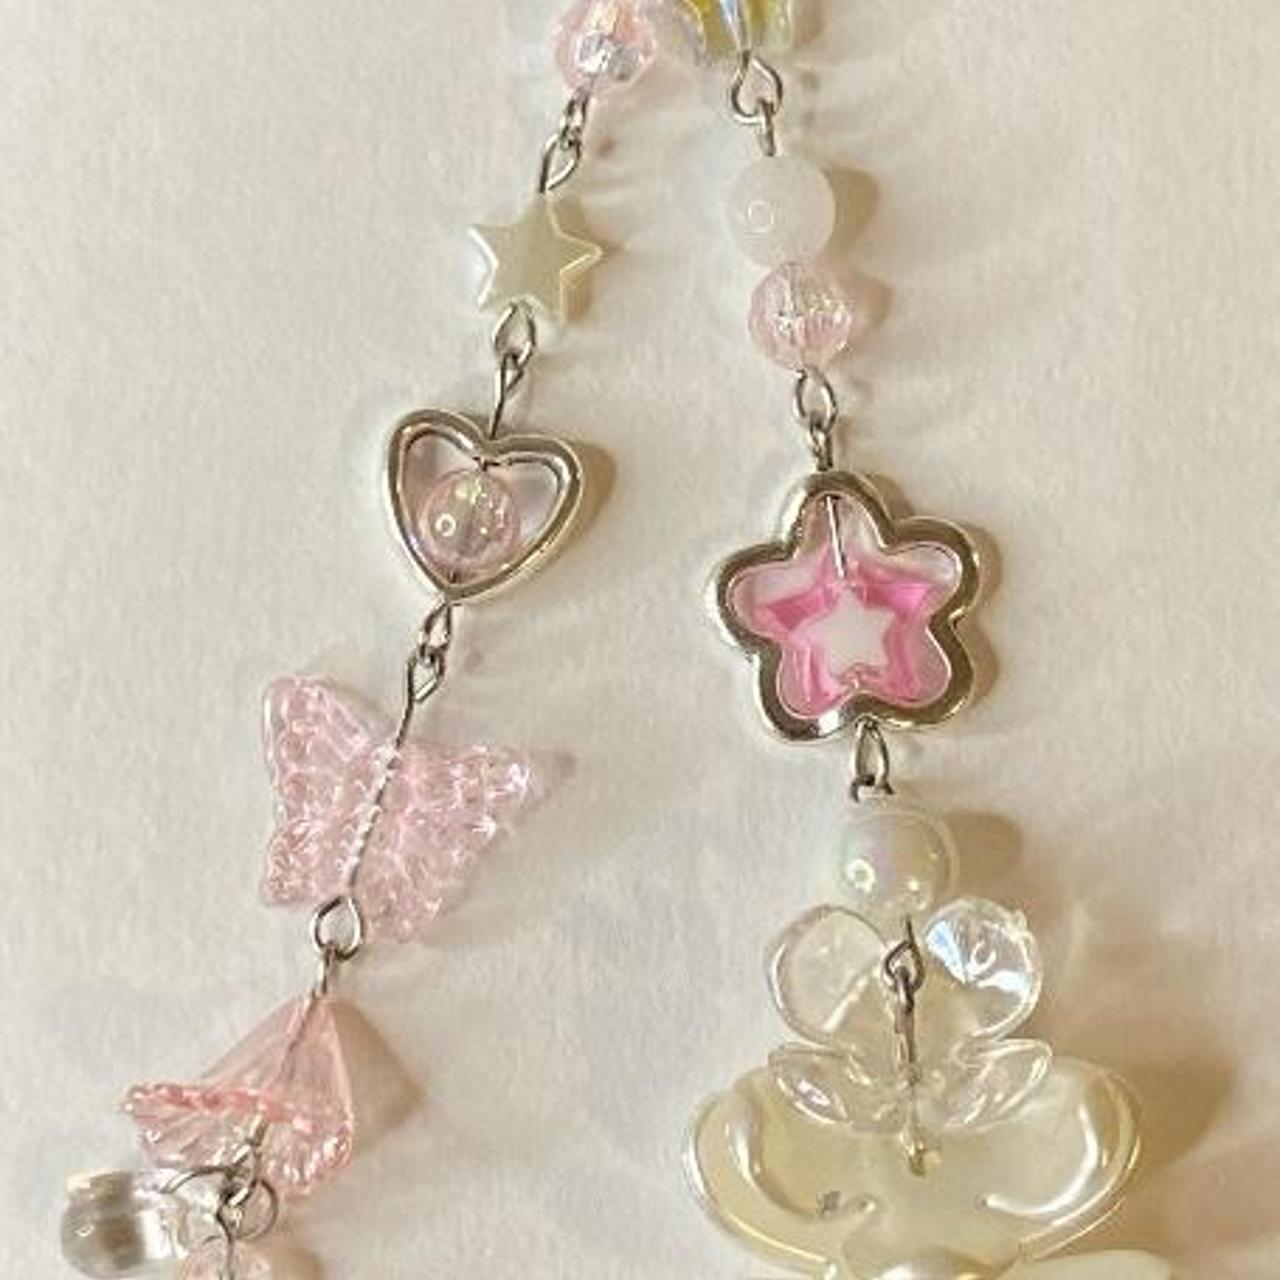 Beadsmith Women's Pink and Silver Jewellery (2)